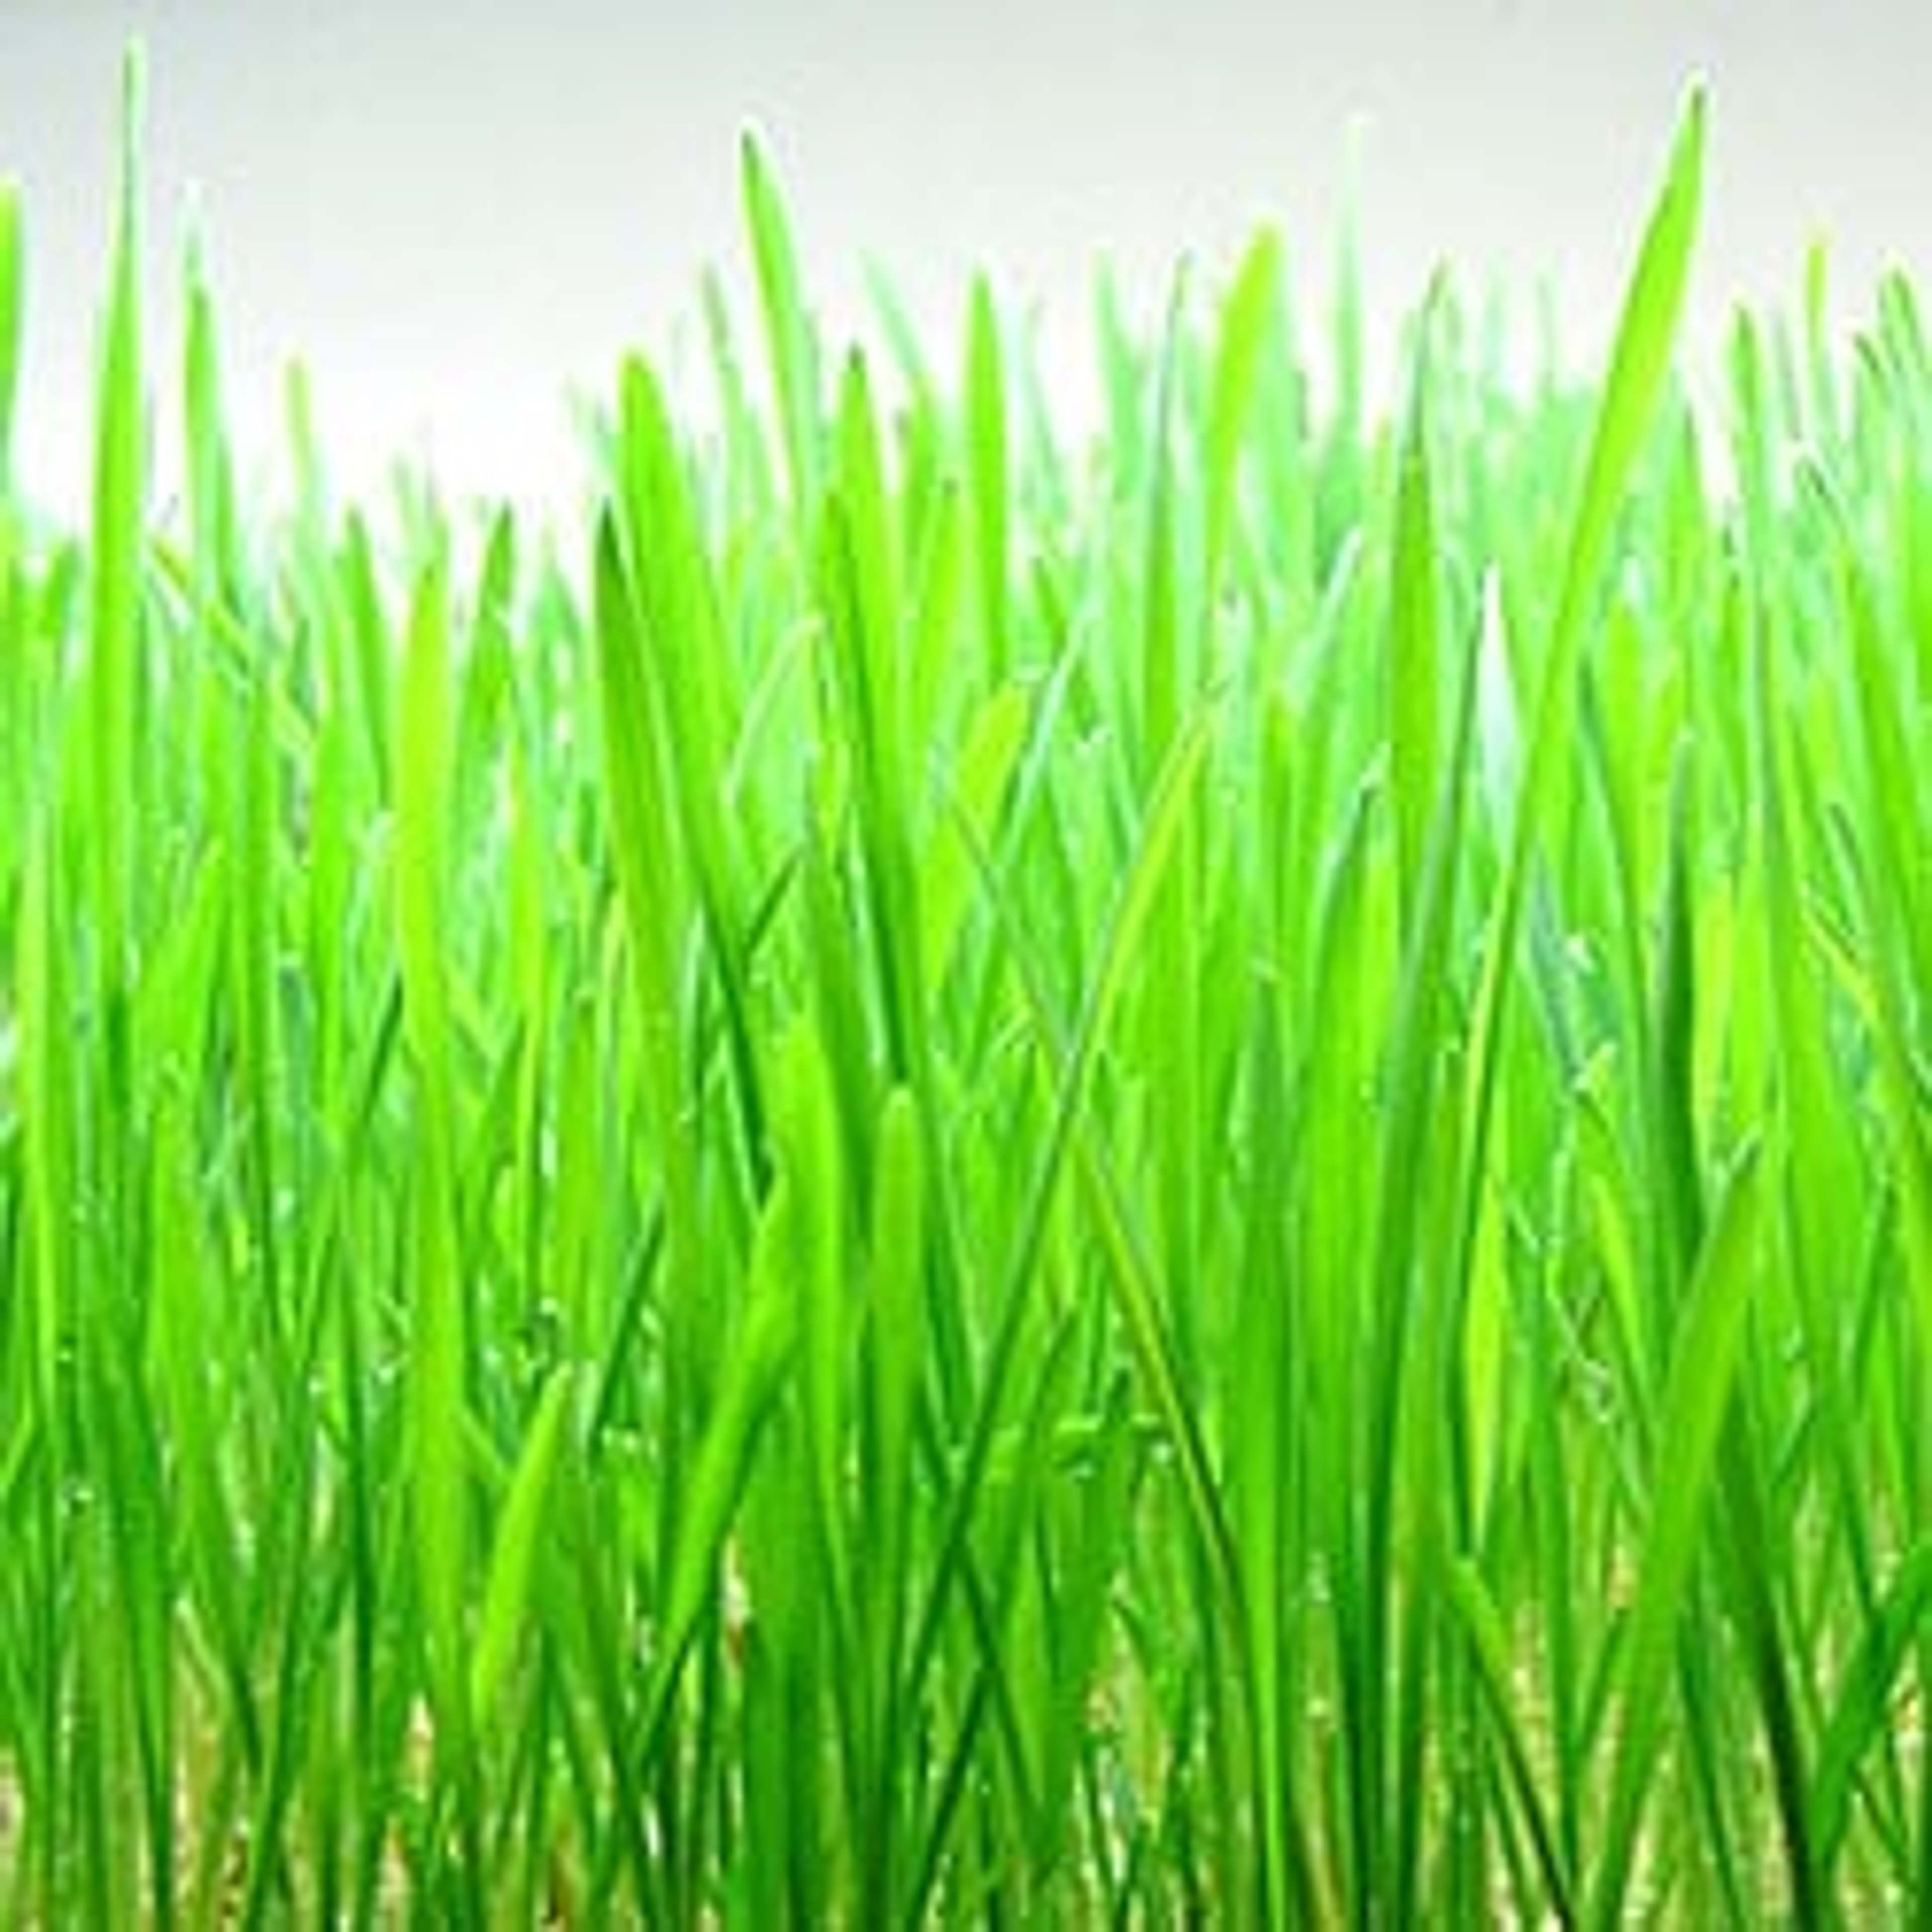 Wheatgrass is an excellent source of amino acids, chlorophyll, vitamins and minerals and can help to improve your health.